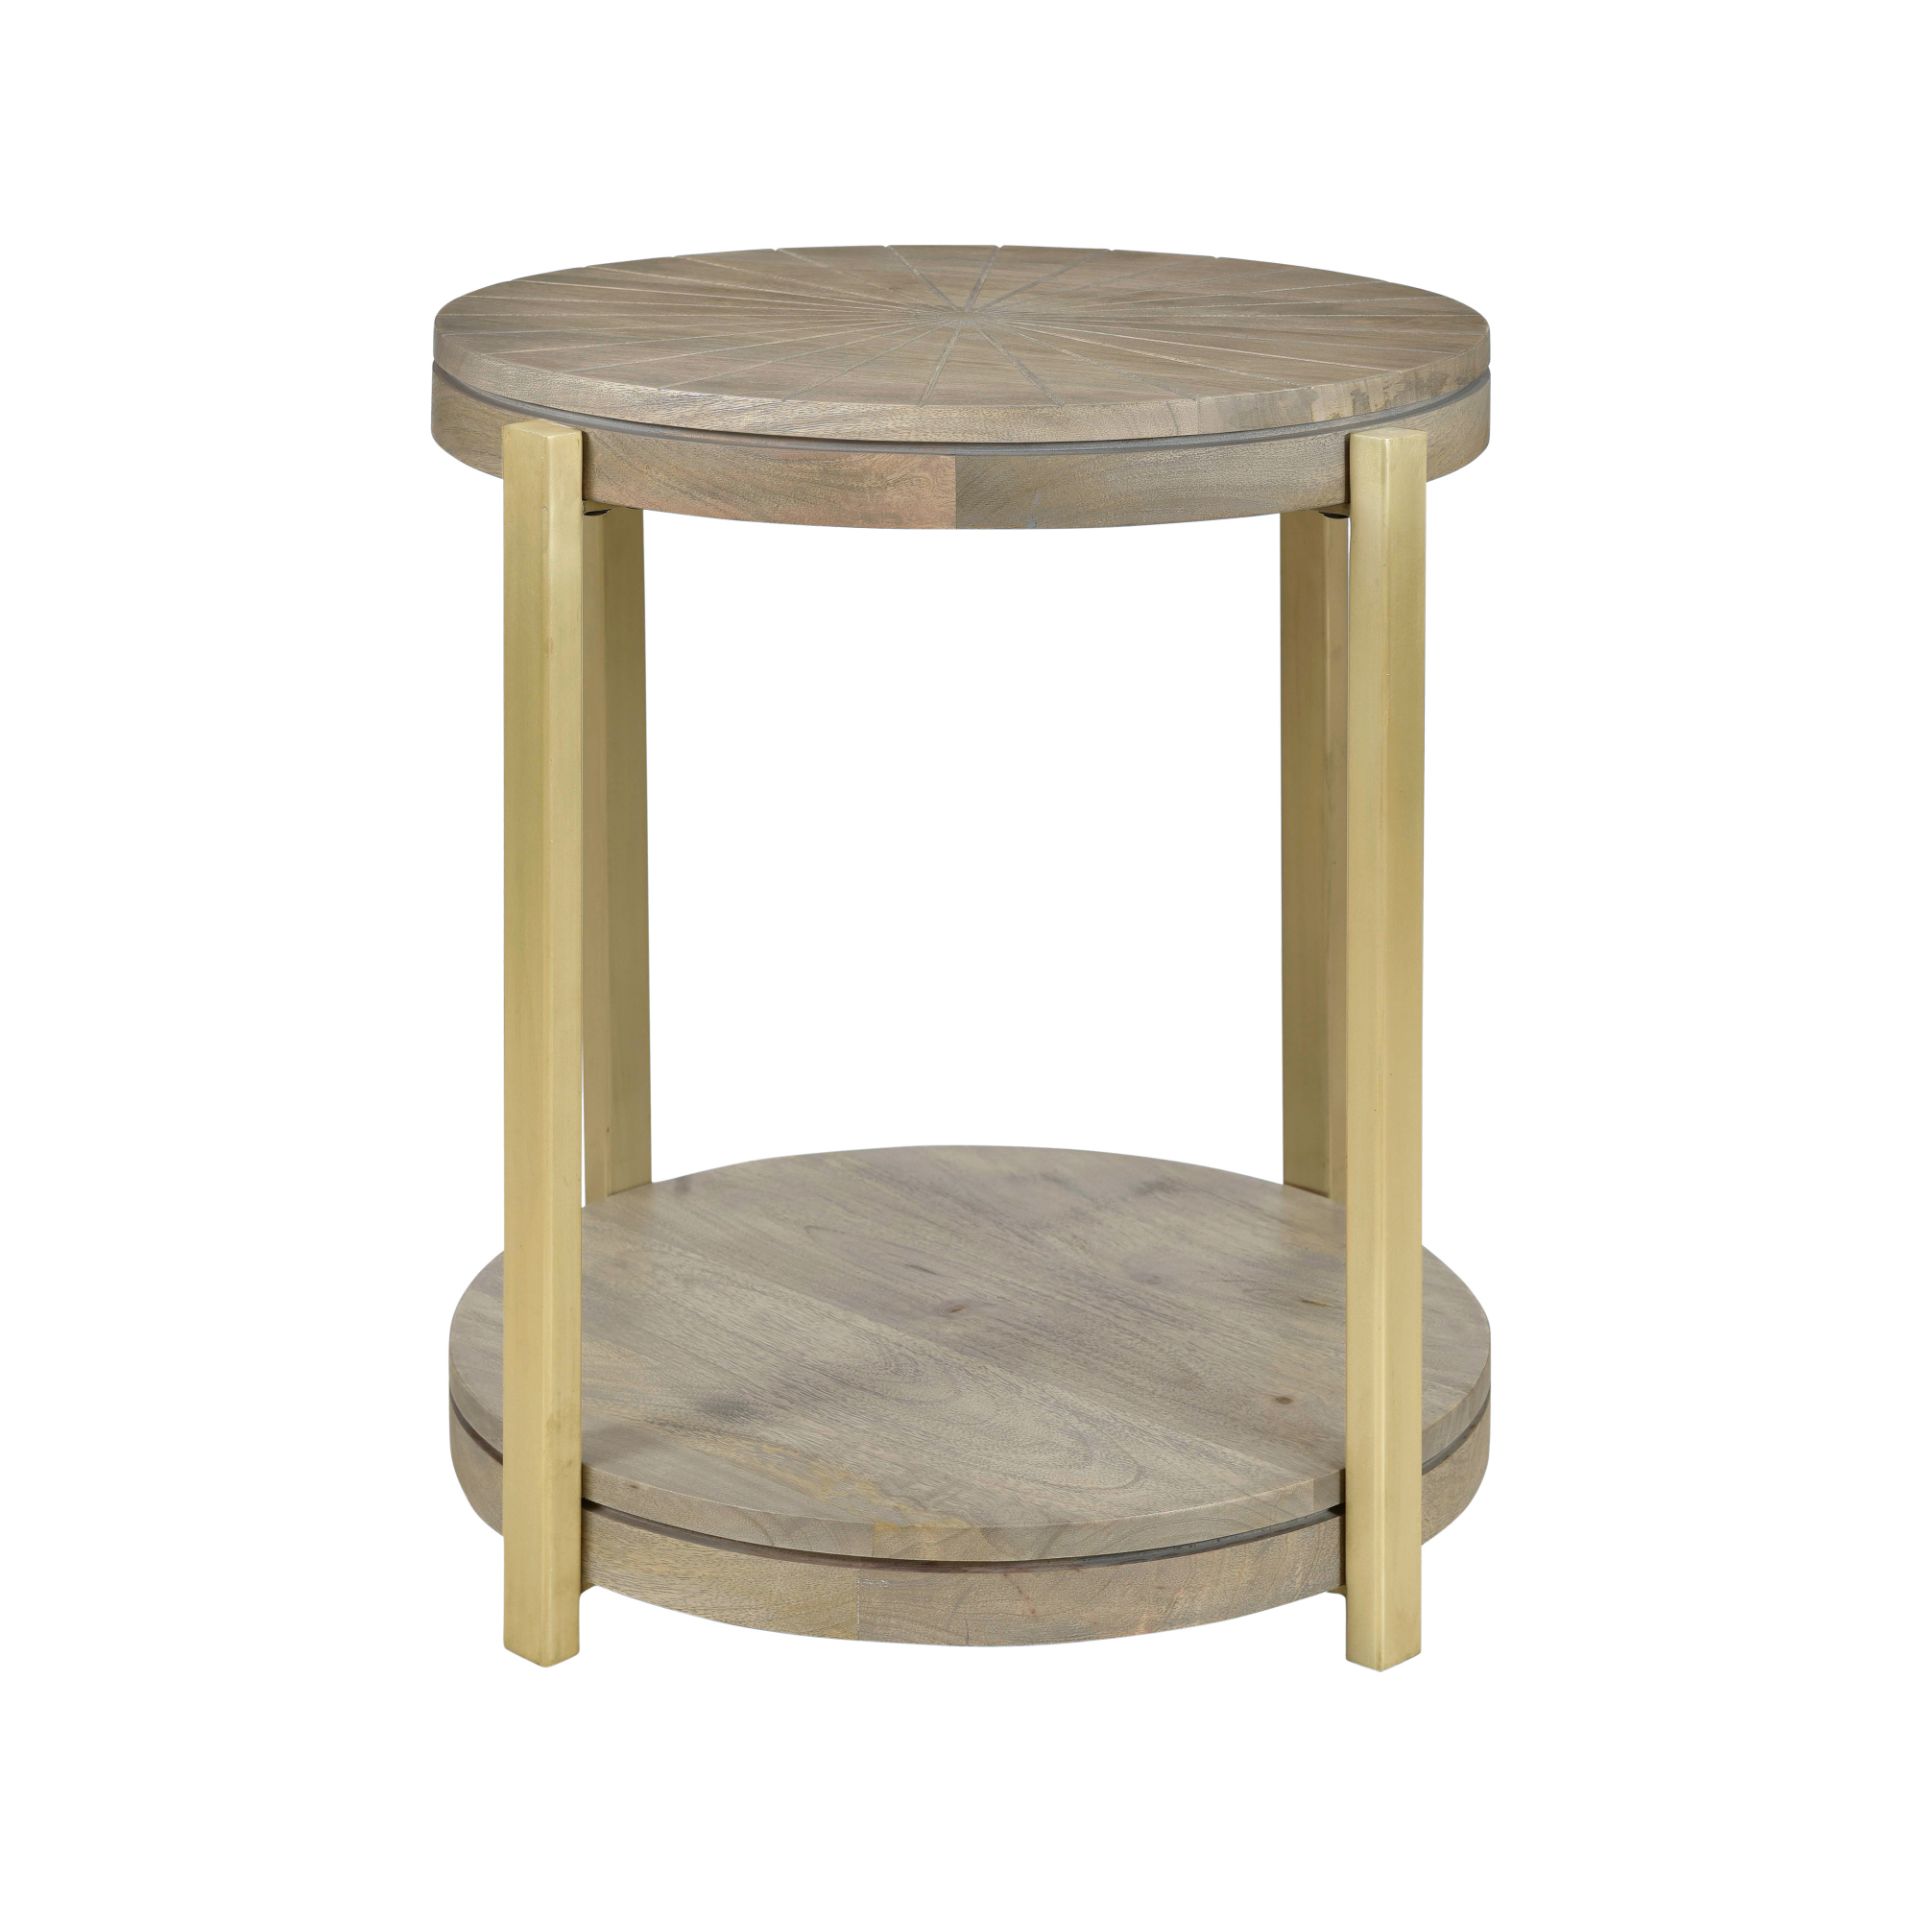 Smithson Side Table Smithson is a stylish and unique collection of furniture for the dining and - Image 4 of 4